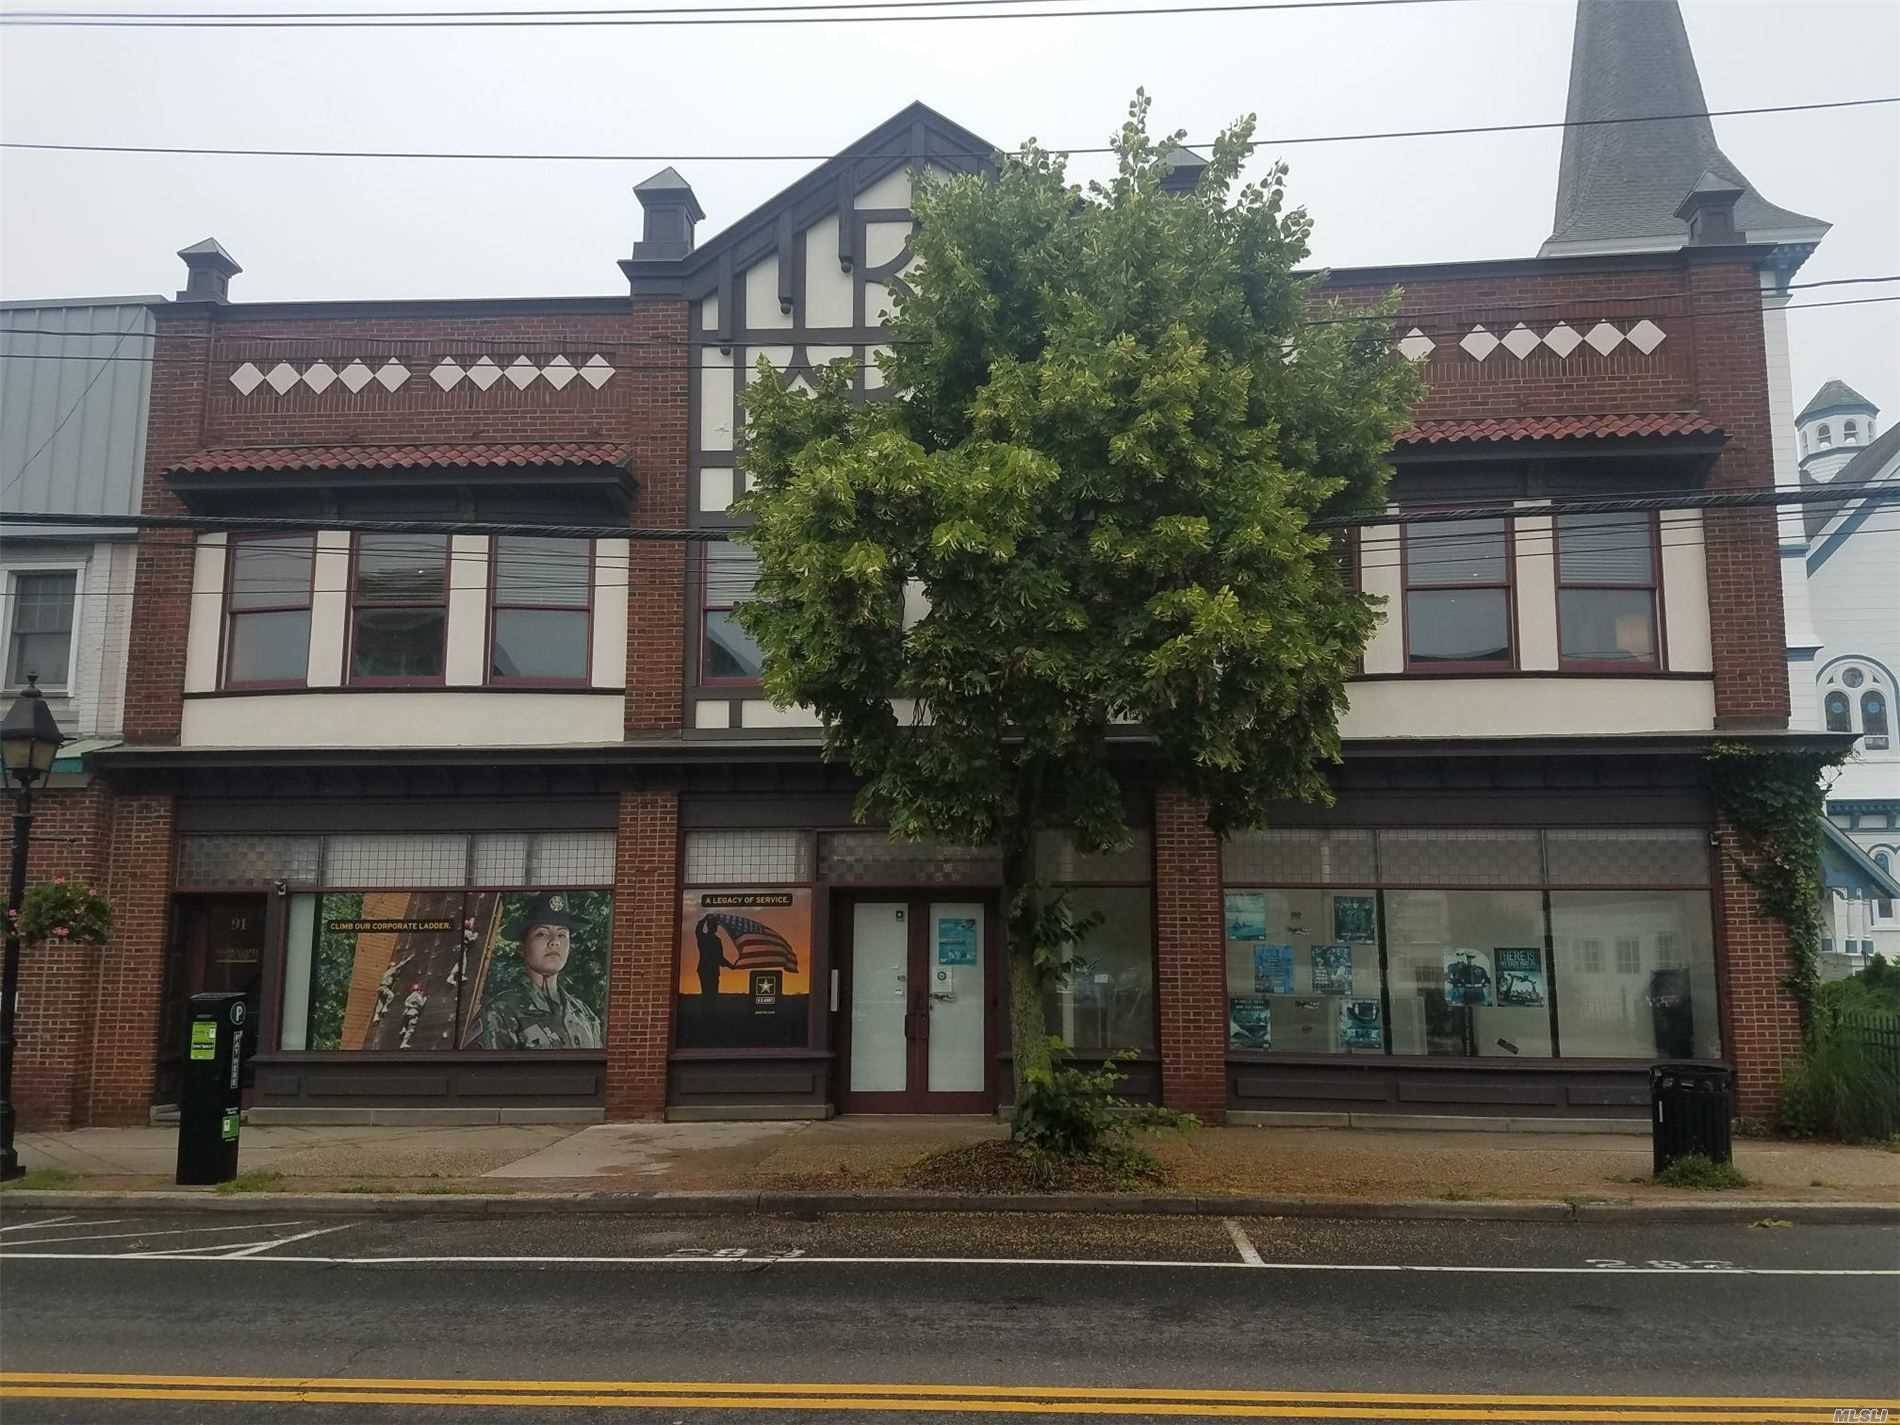 1500 SF of Wood Paneled 2nd Floor Office Space on Thriving Main St.